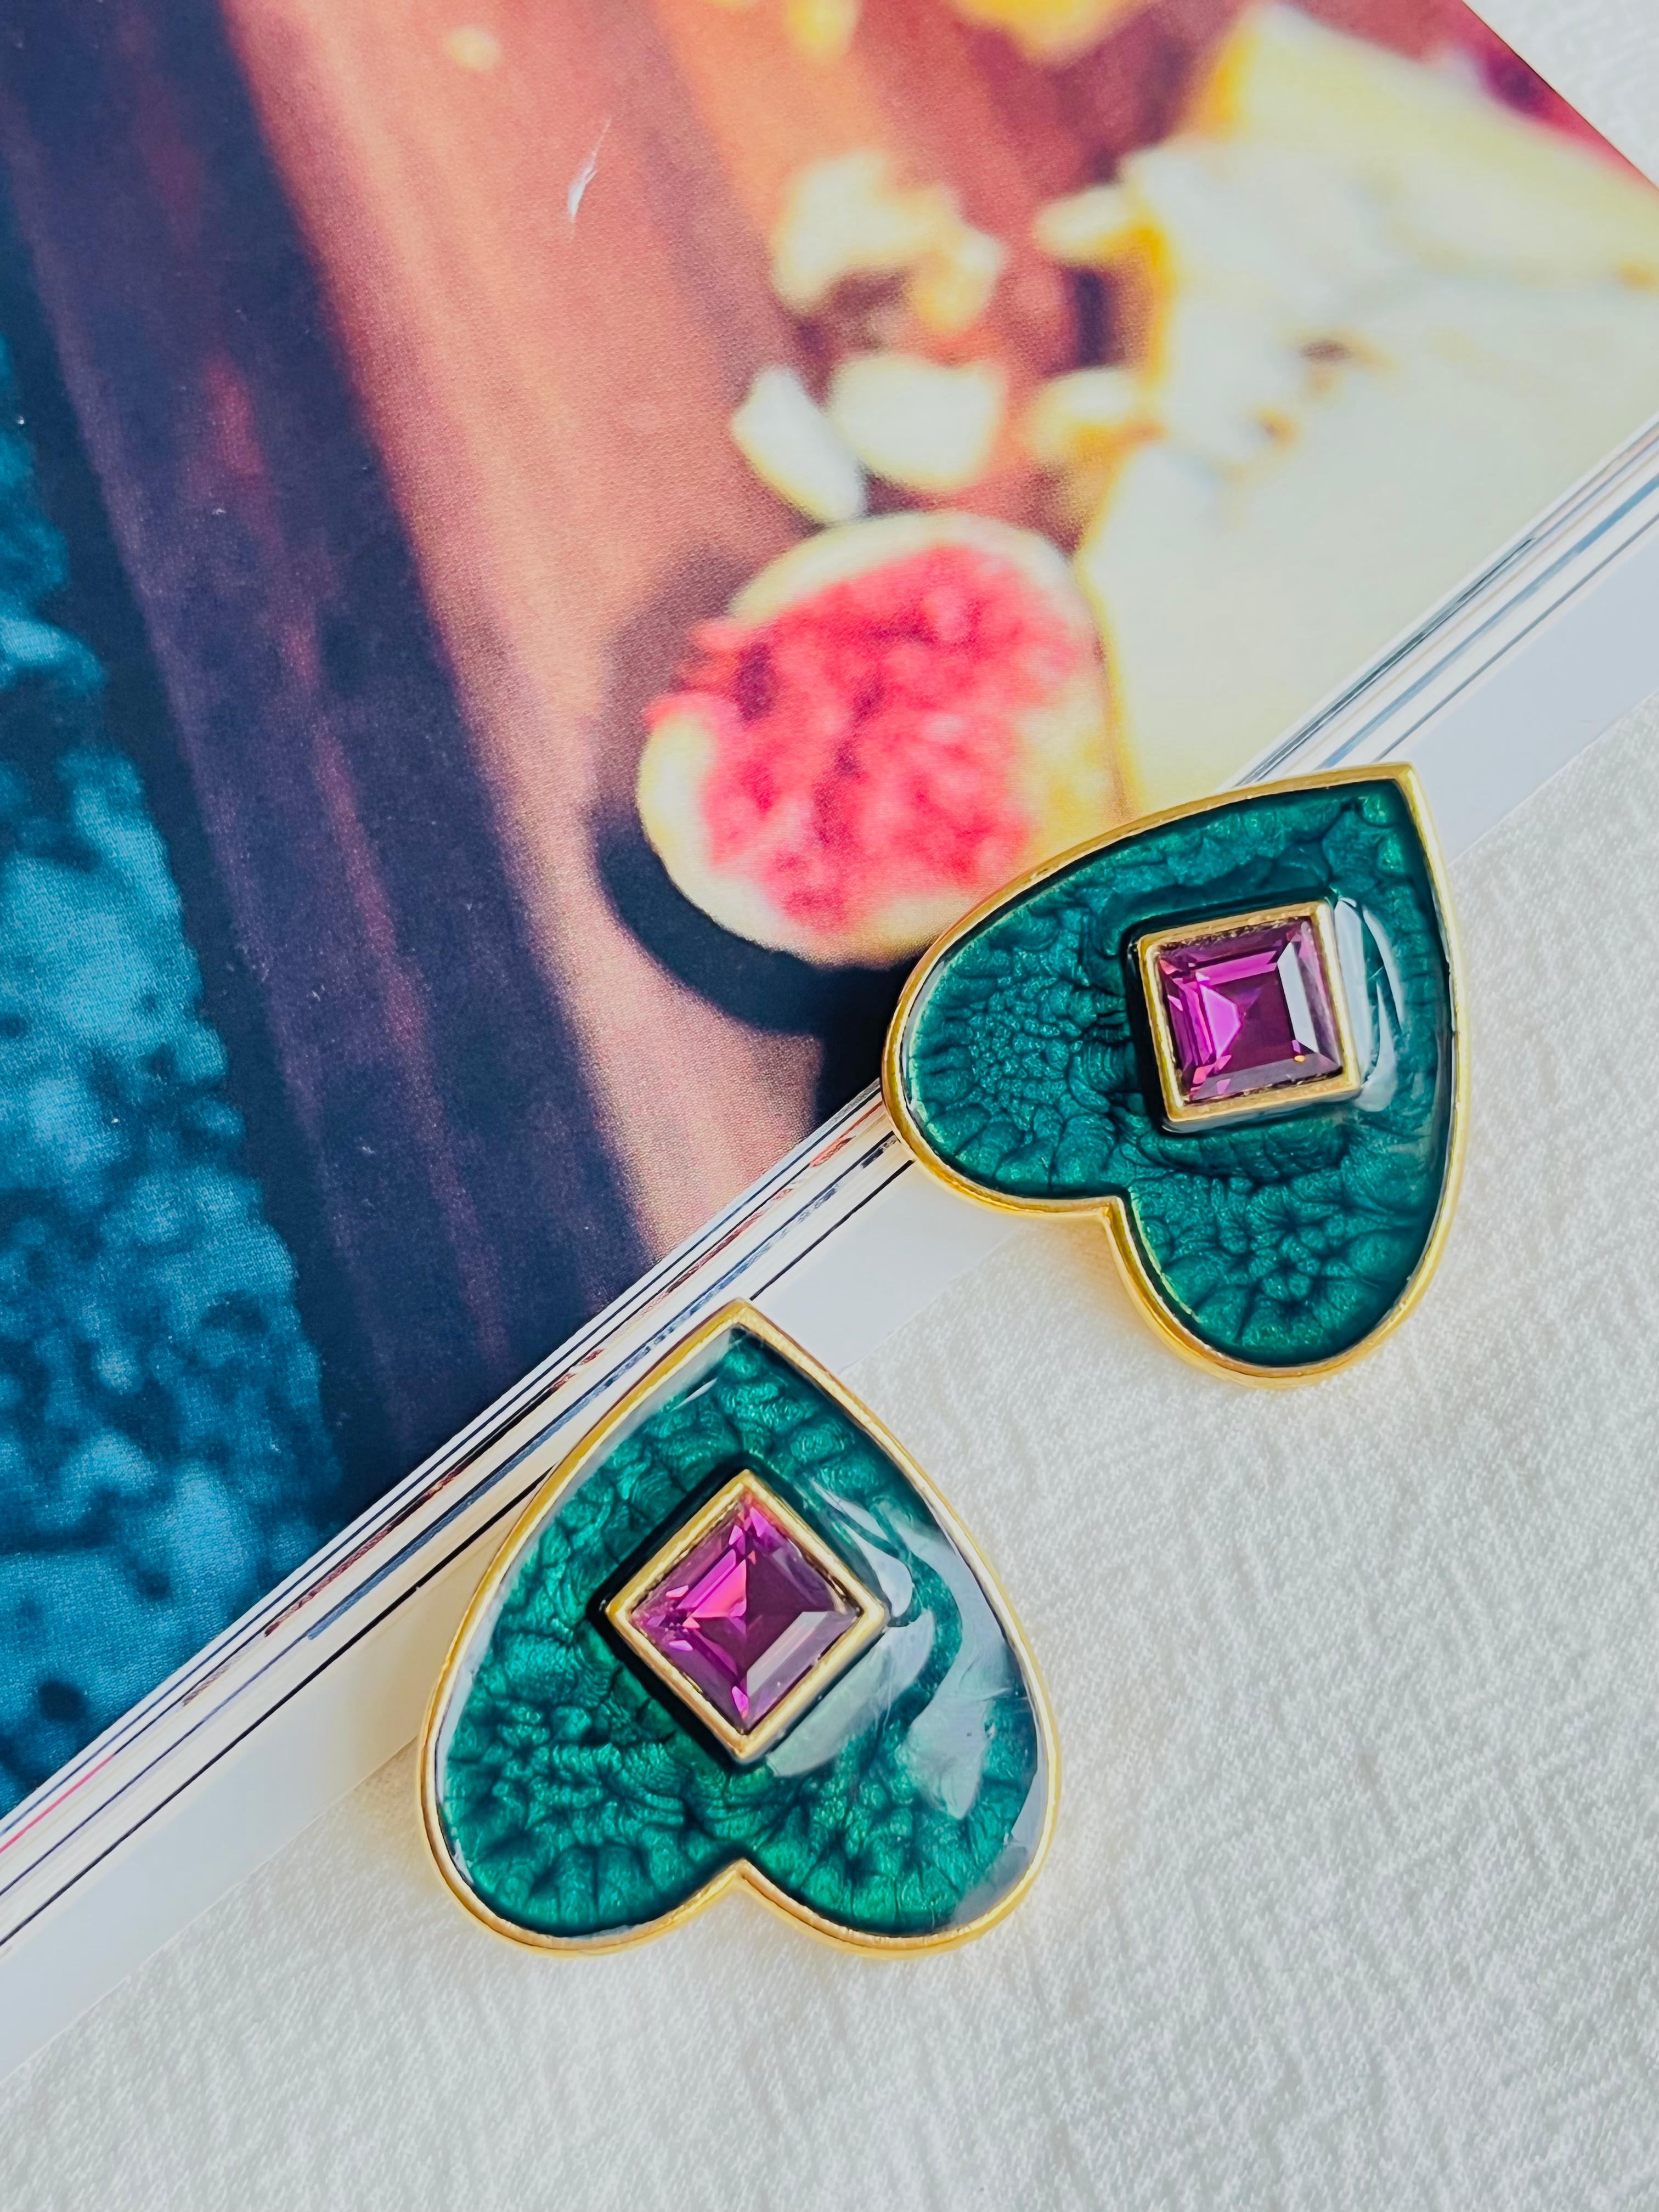 Yves Saint Laurent YSL Vintage Dark Green Enamel Heart Amethyst Purple Diamond Cube Clip Earrings, Gold Tone

Vintage and very rare to find. 100% Genuine. Signed at the rear.

Very excellent condition. 

Size: 4.0*3.3 cm.

Weight: 12.0 g/each.

_ _